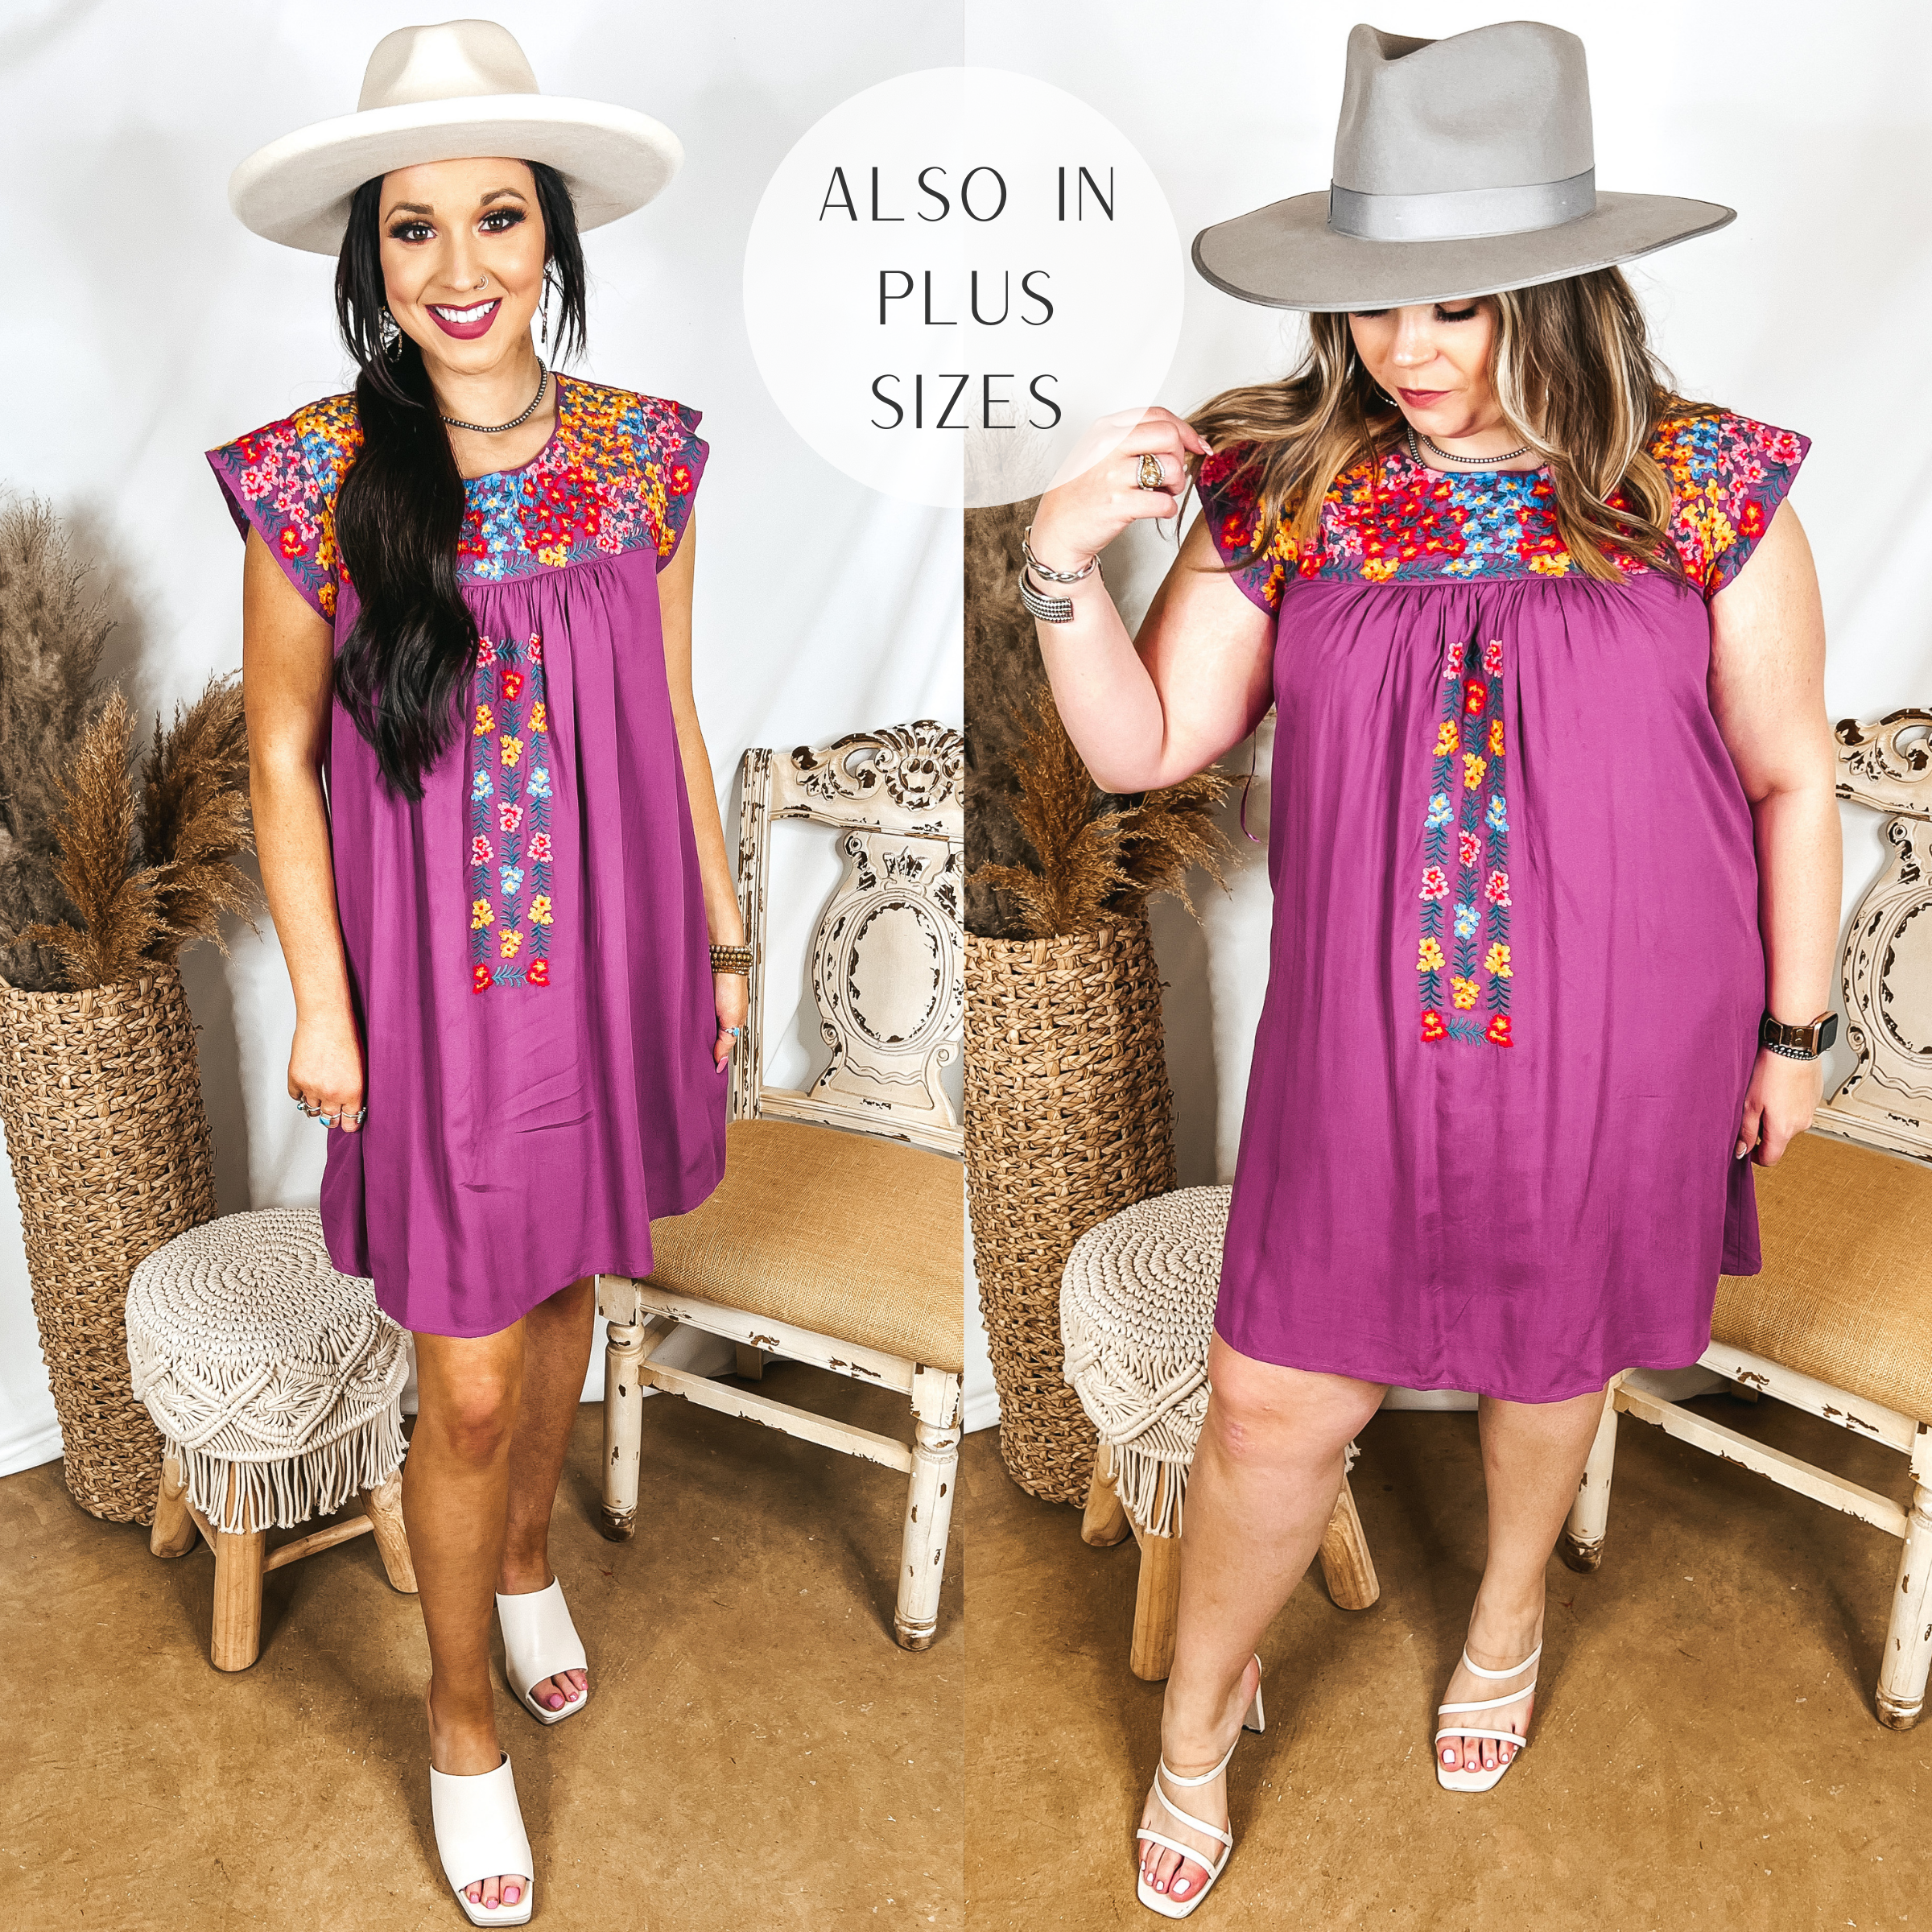 Models are wearing a magenta purple dress that has an embroidered upper and ruffle cap sleeves. Size small model has it paired with white heels and an ivory hat. Size large model has it paired with white heels and a grey hat.